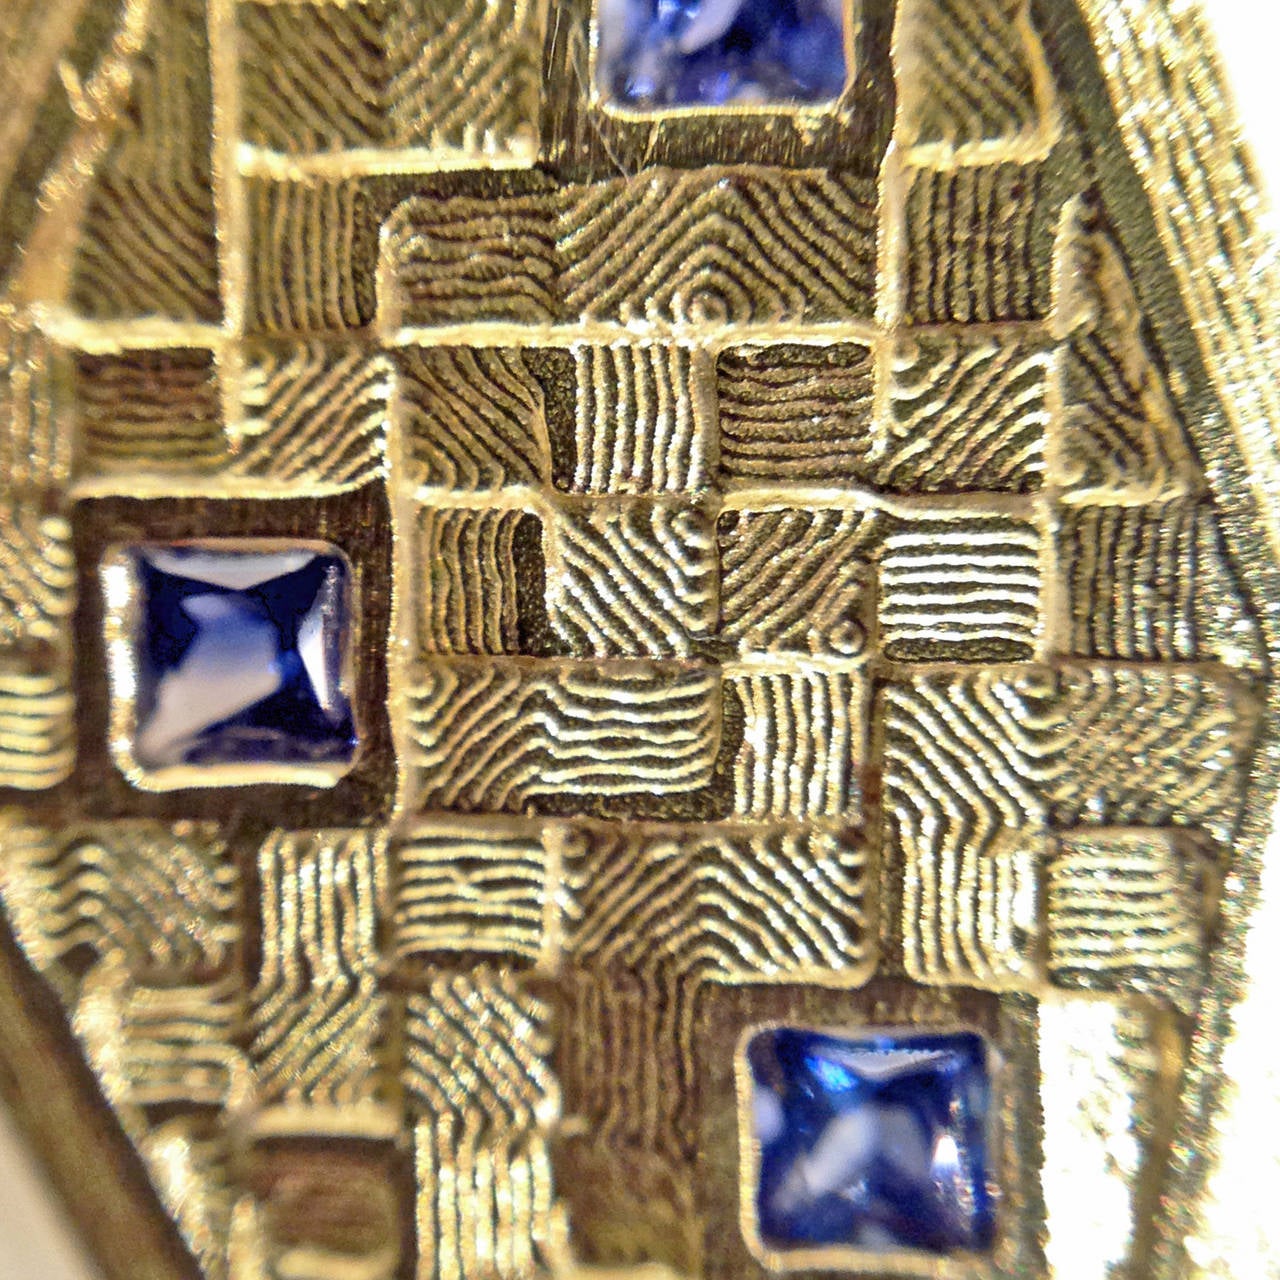 One-of-a-Kind Princess-Cut Cornflower Blue Sapphire Earrings in 18k yellow gold.  Made with a 3D Printer, the 18k gold has an incredibly detailed texture that captures light in a mystical, otherworldly way. Please call or email us for a video to